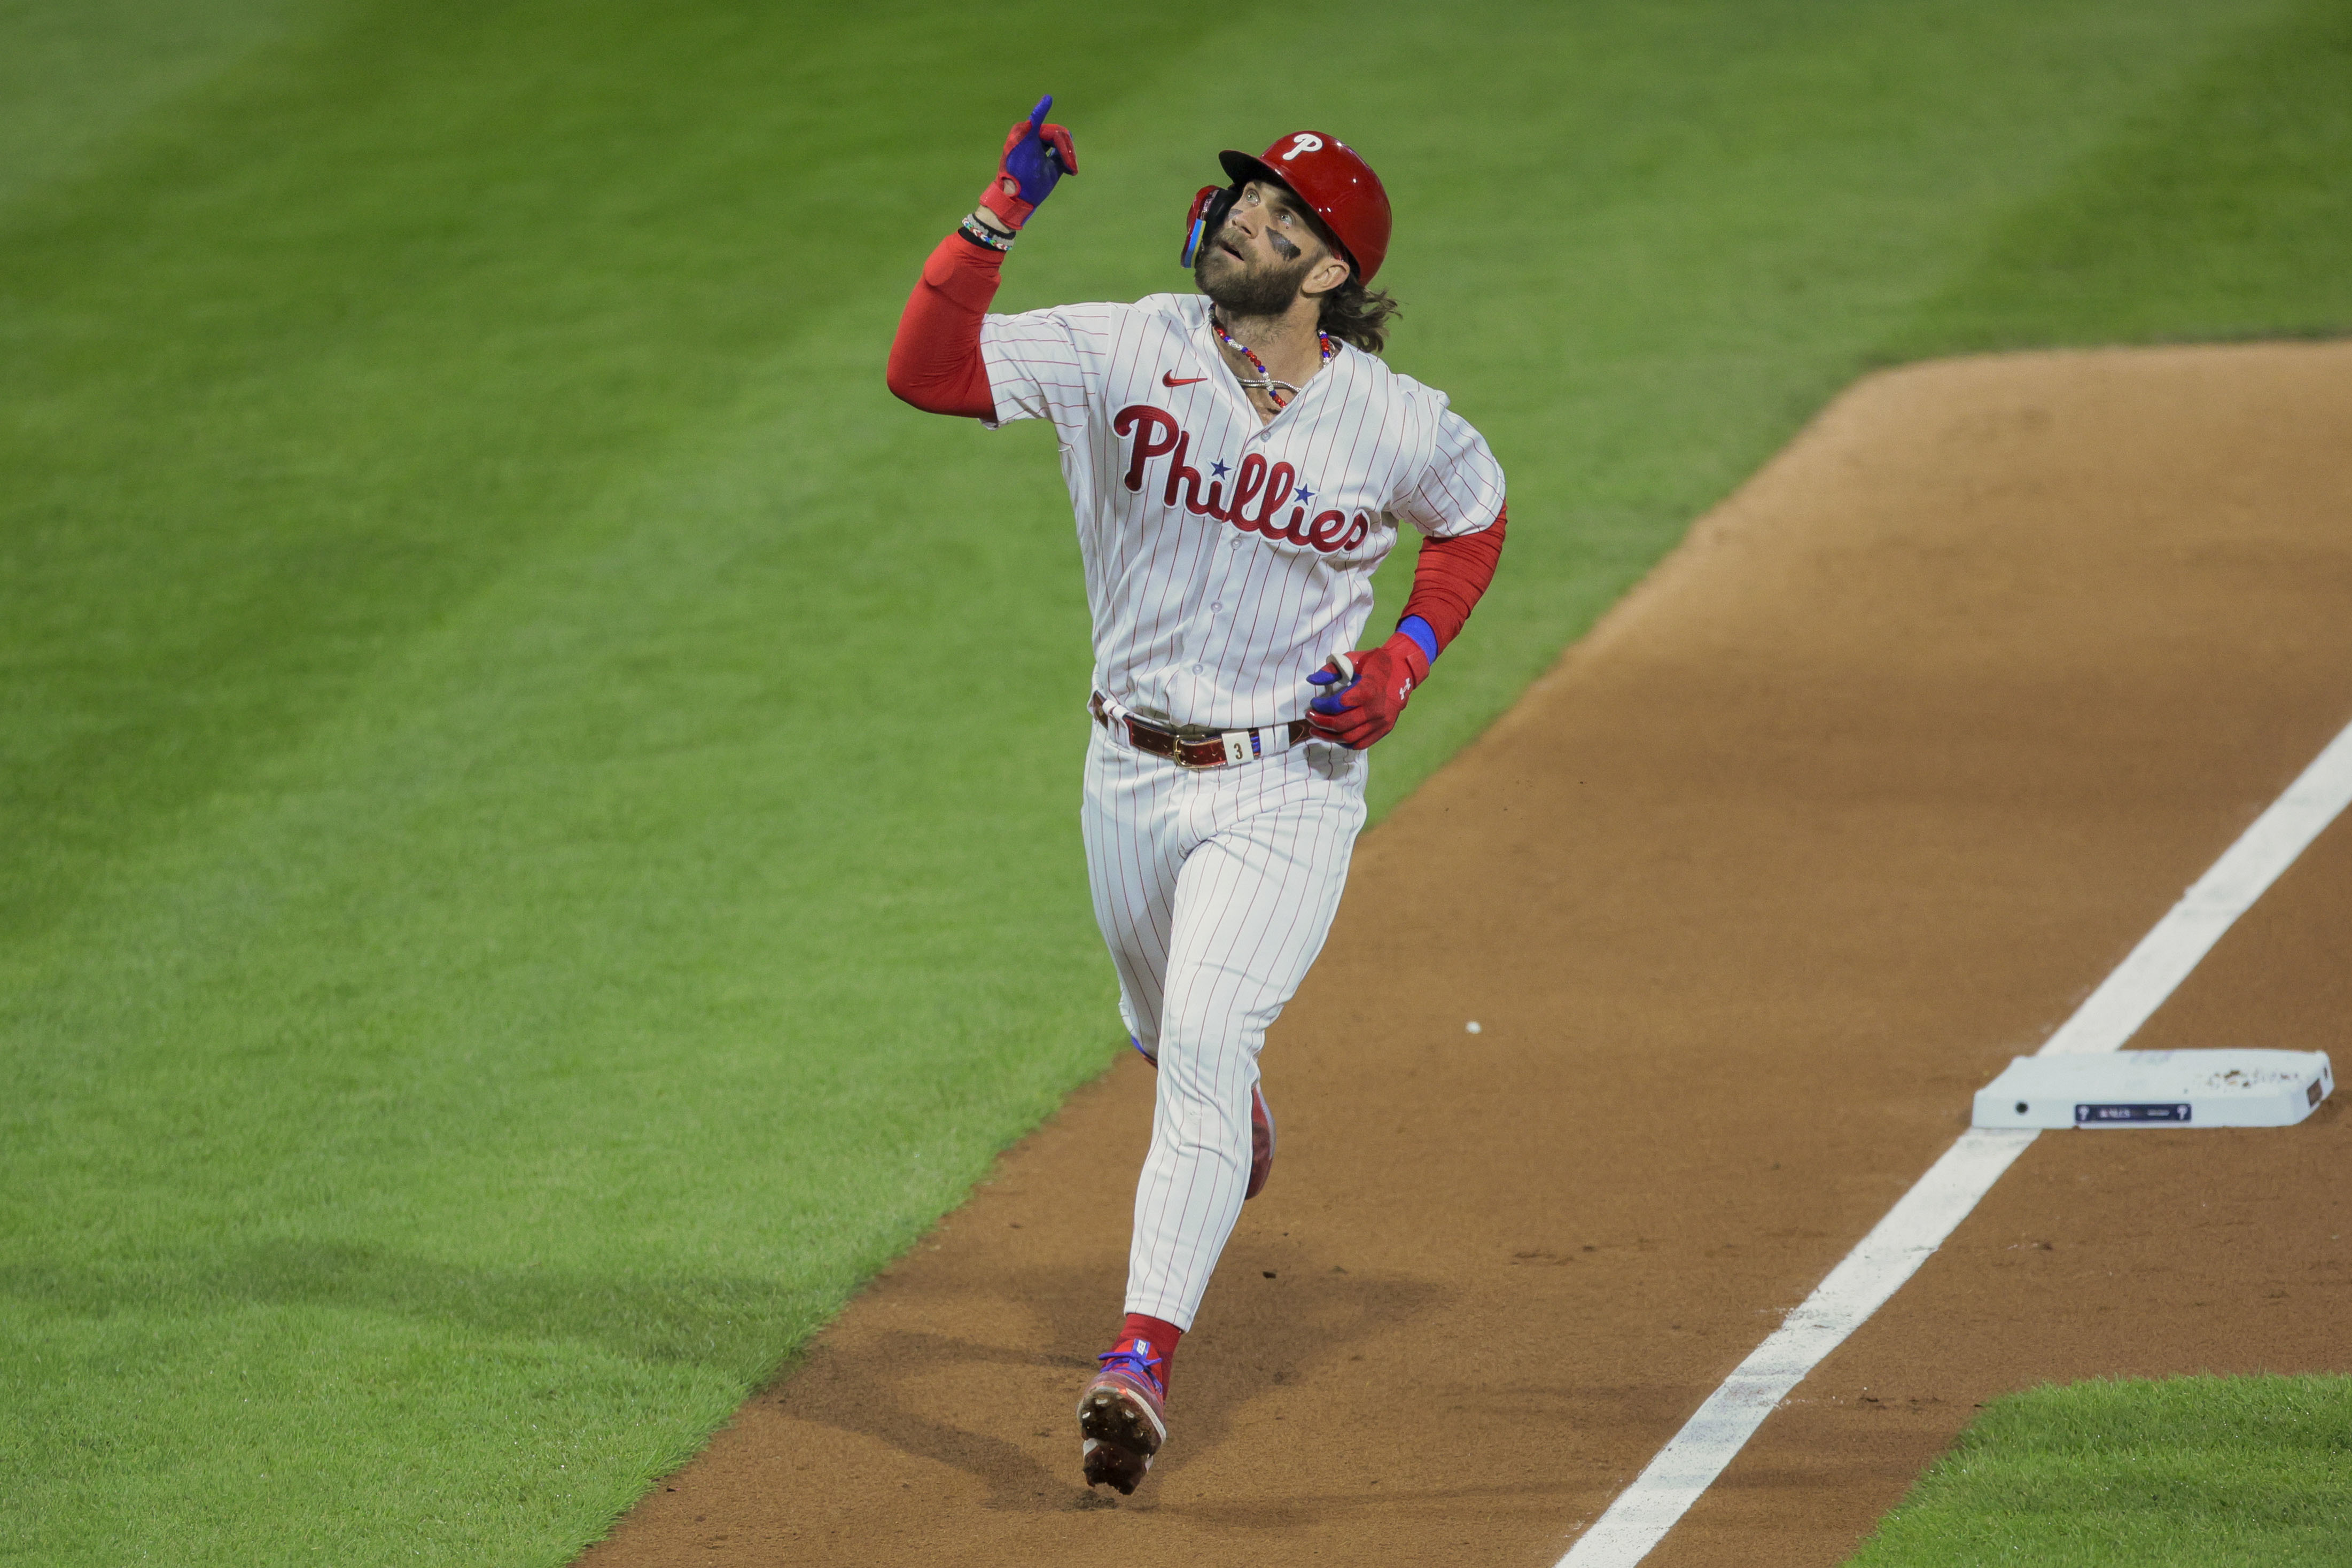 Attaboy! Bryce Harper adds to his legend with two homers, pushes